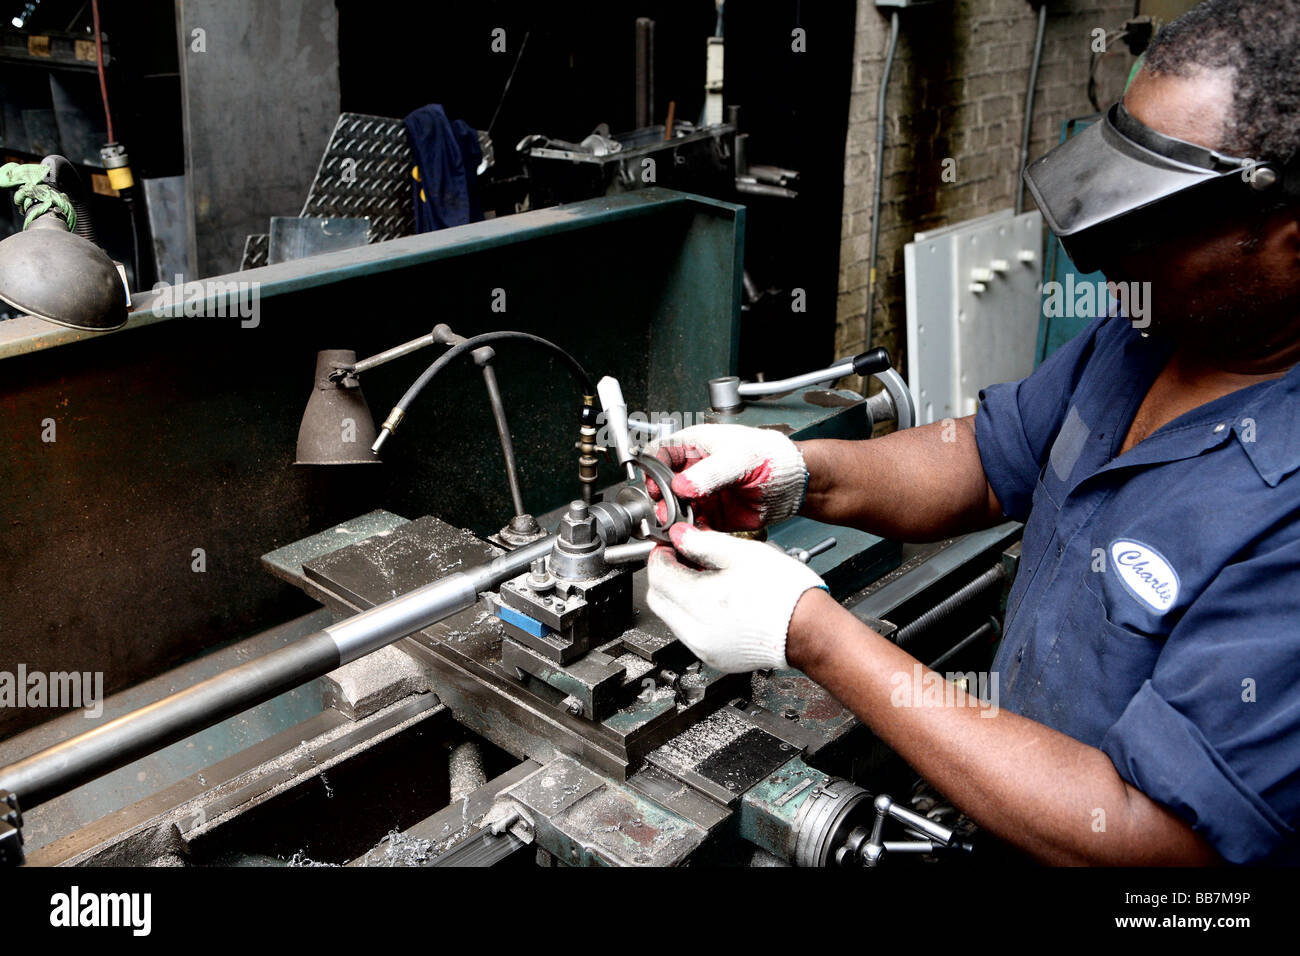 Worker at lathe Stock Photo